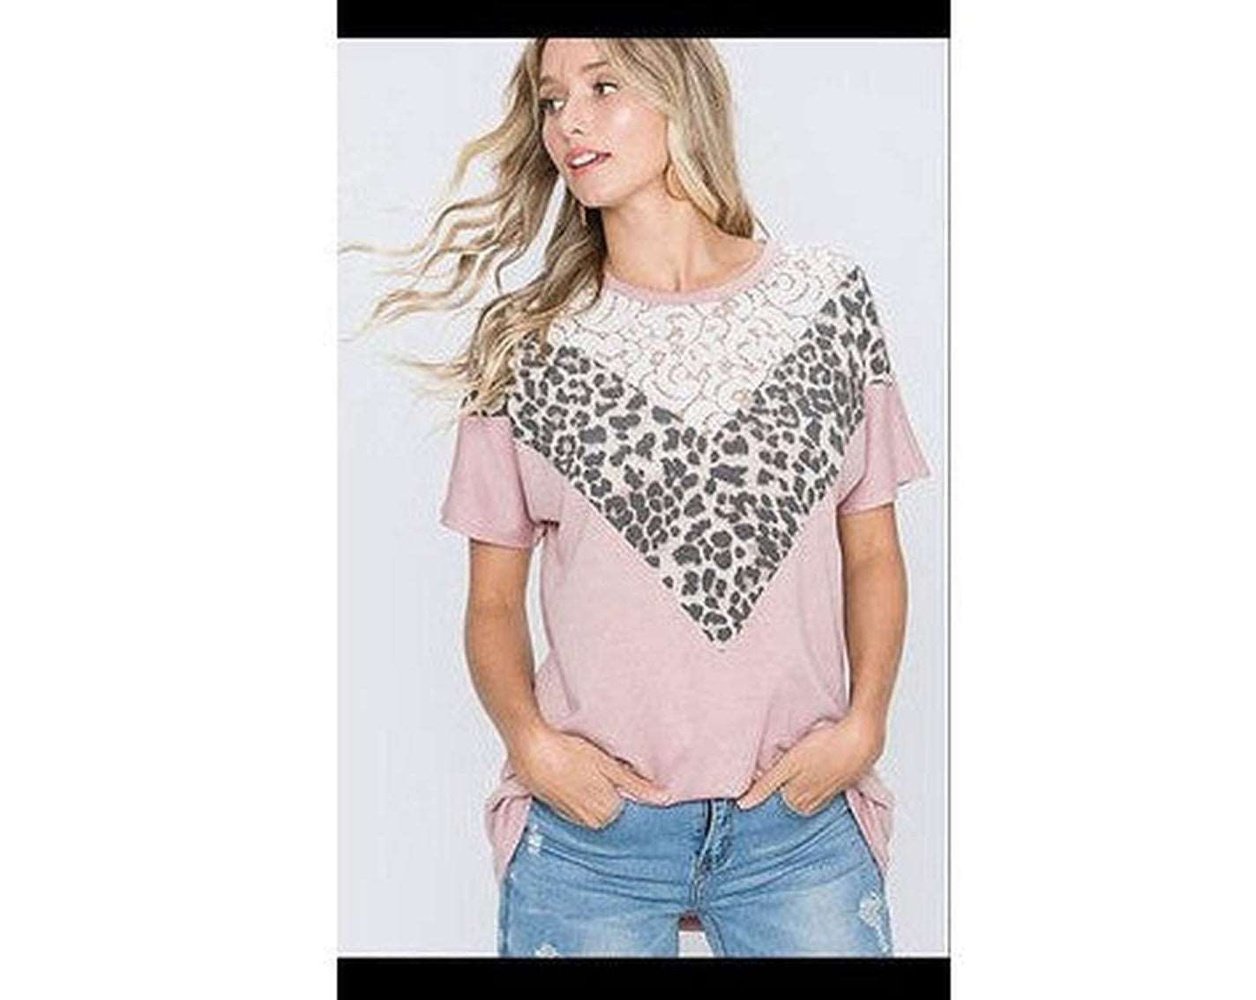 Dusky Pink Leopard & Lace Women's Top Available in 2 sizes - to fit UK 8-14 & UK 12-18 - style-heaven